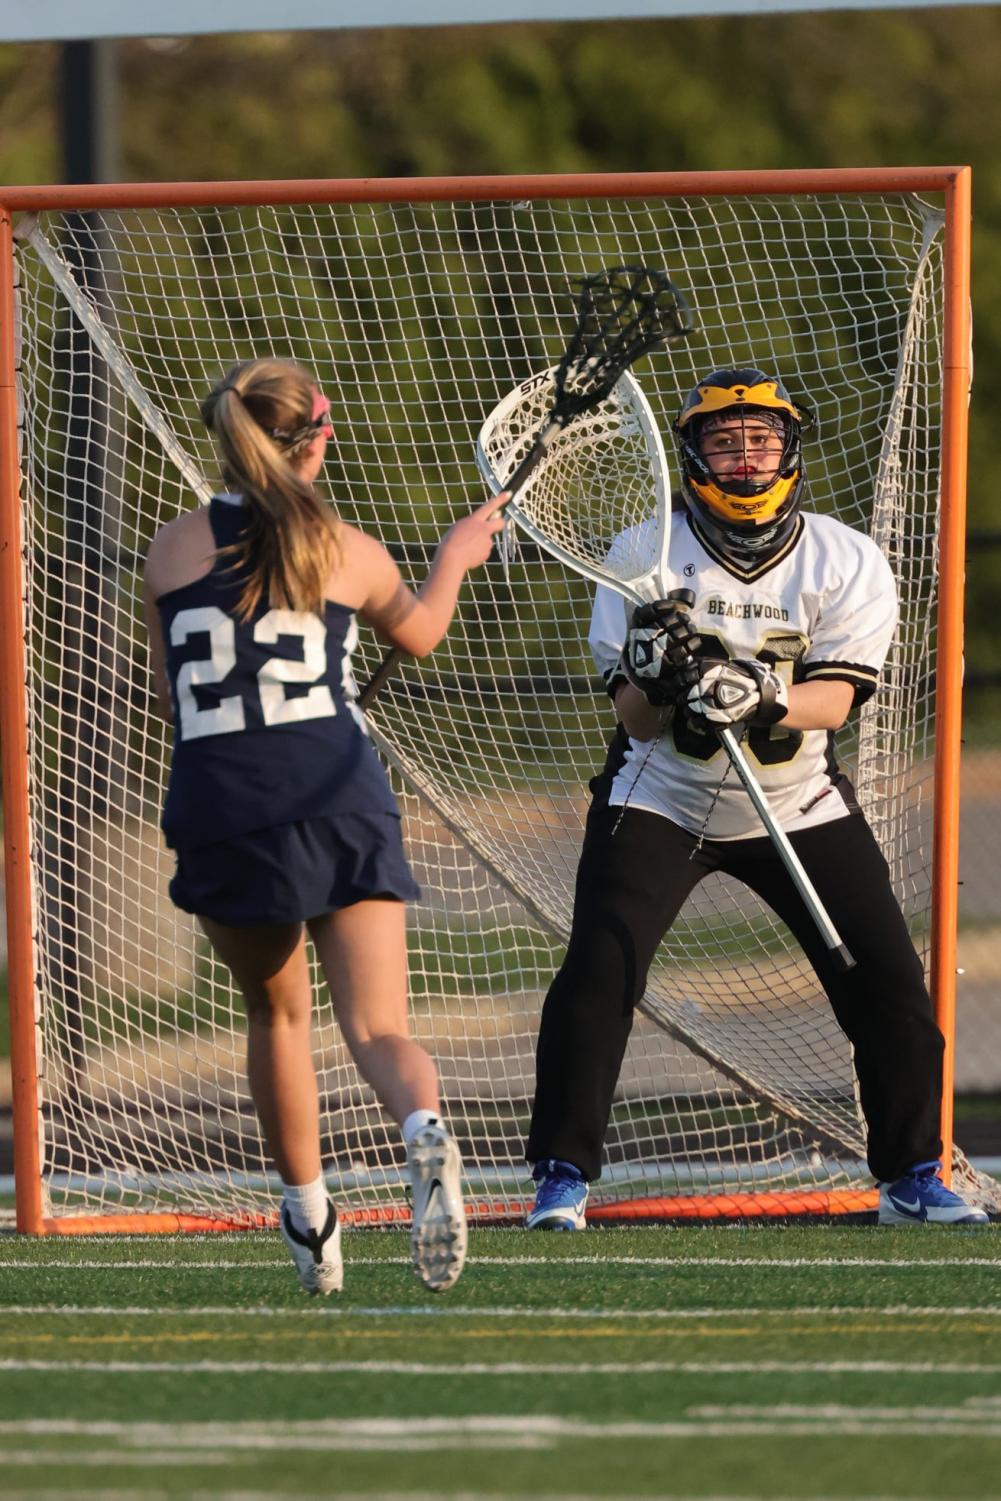 Junior Leah Yakubov defends the goal against a Solon attacker. 